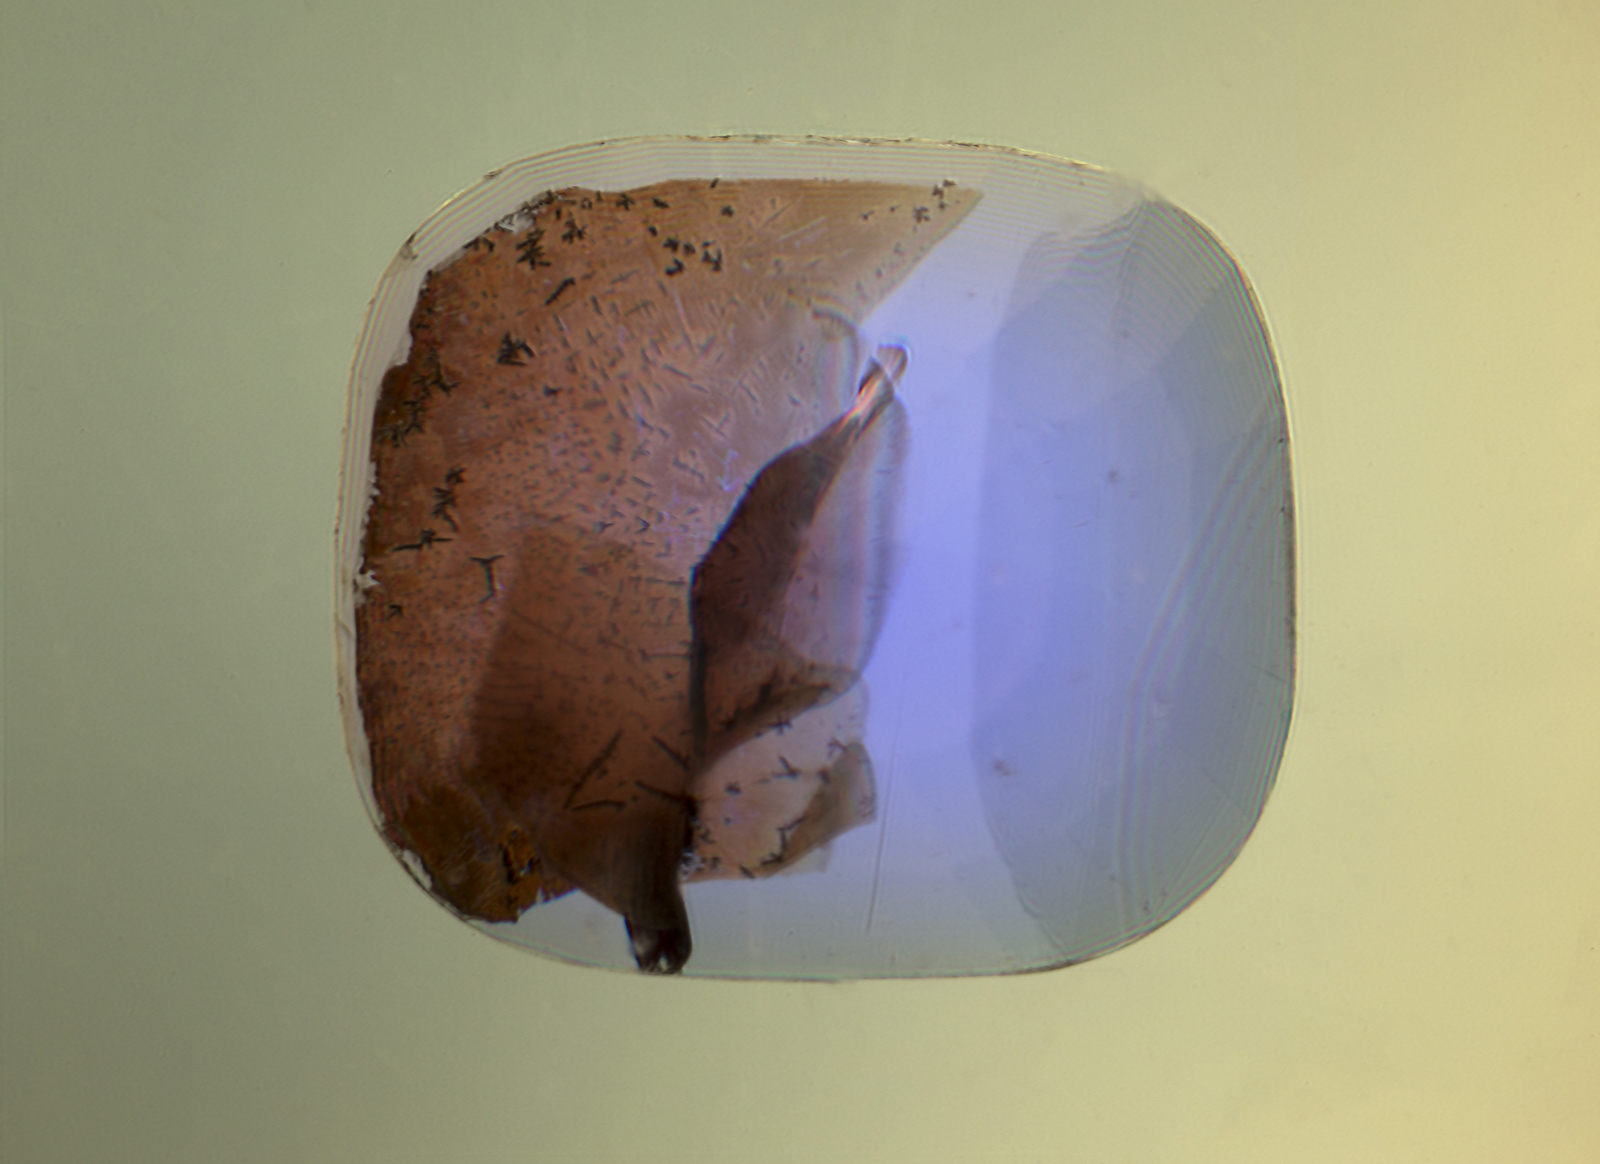 When immersed in di-iodomethane (methylene iodide), the extent of the fissure becomes readily apparent. Adding polarized light reveals Plato-Sandmeier twinning. A dislocation needle can also be seen at the lower center of the stone.